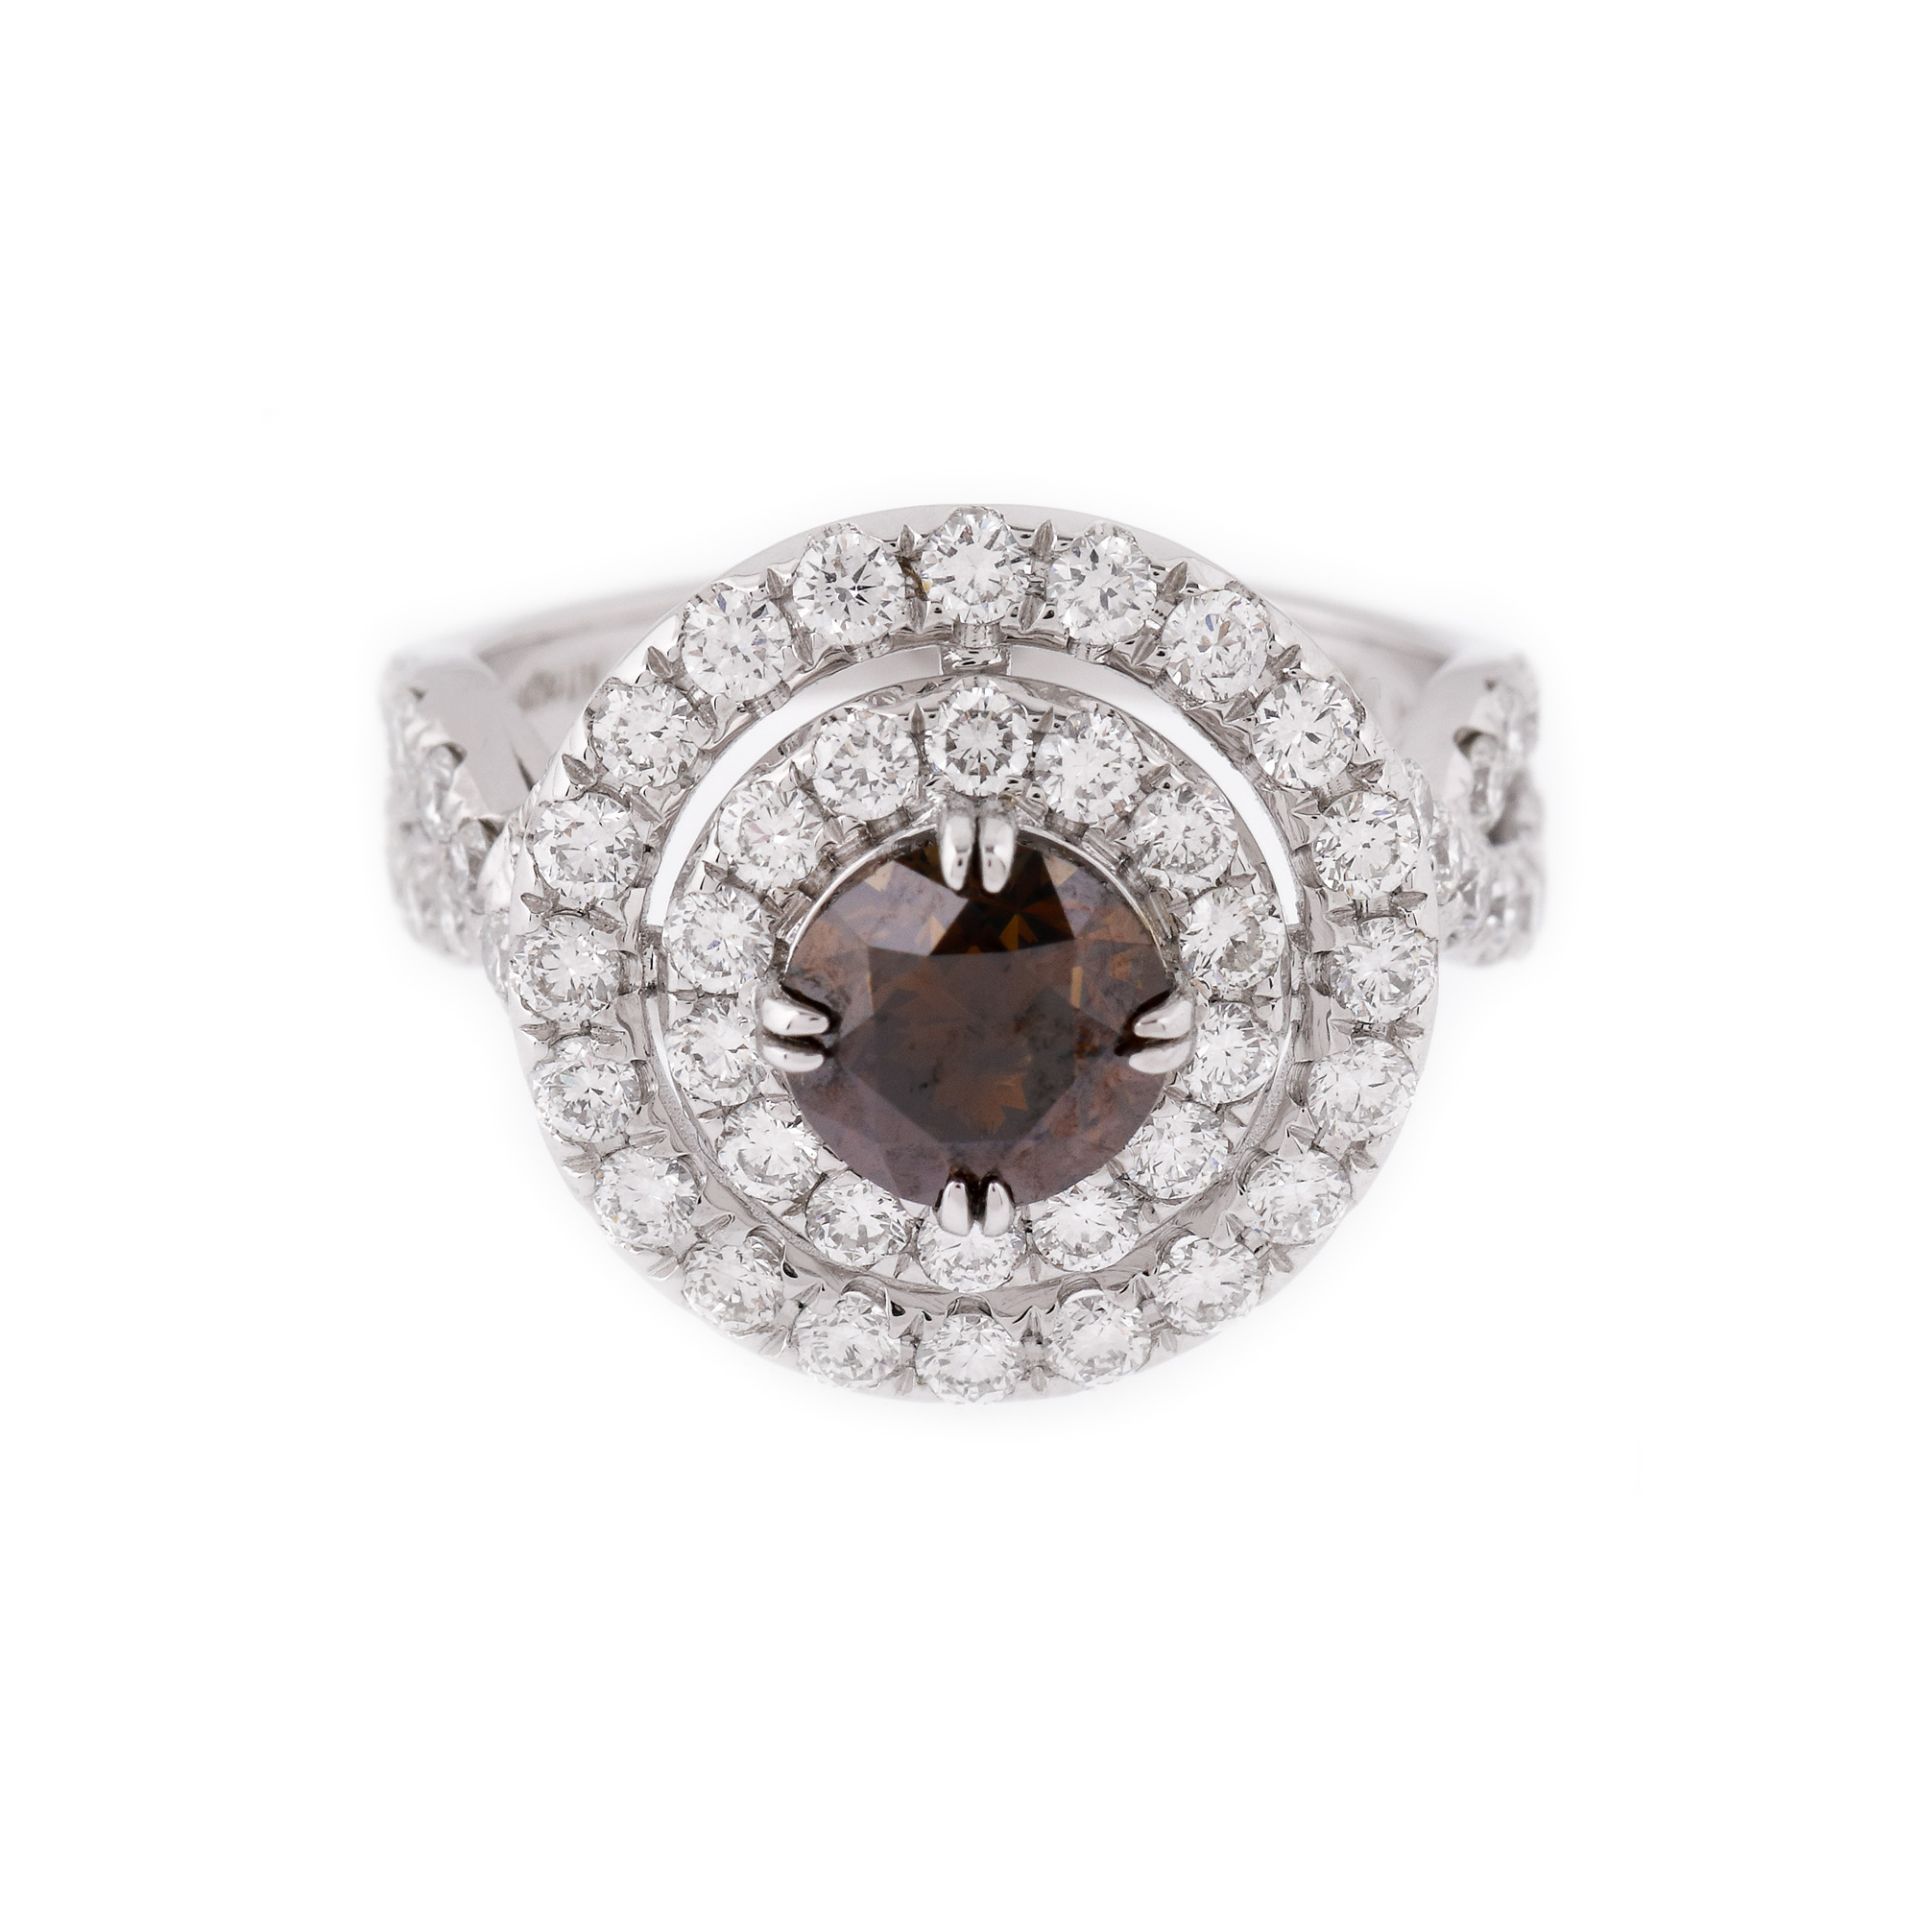 White gold ring, centrally decorated with deep orange brown diamond, surrounded by two rows of brill